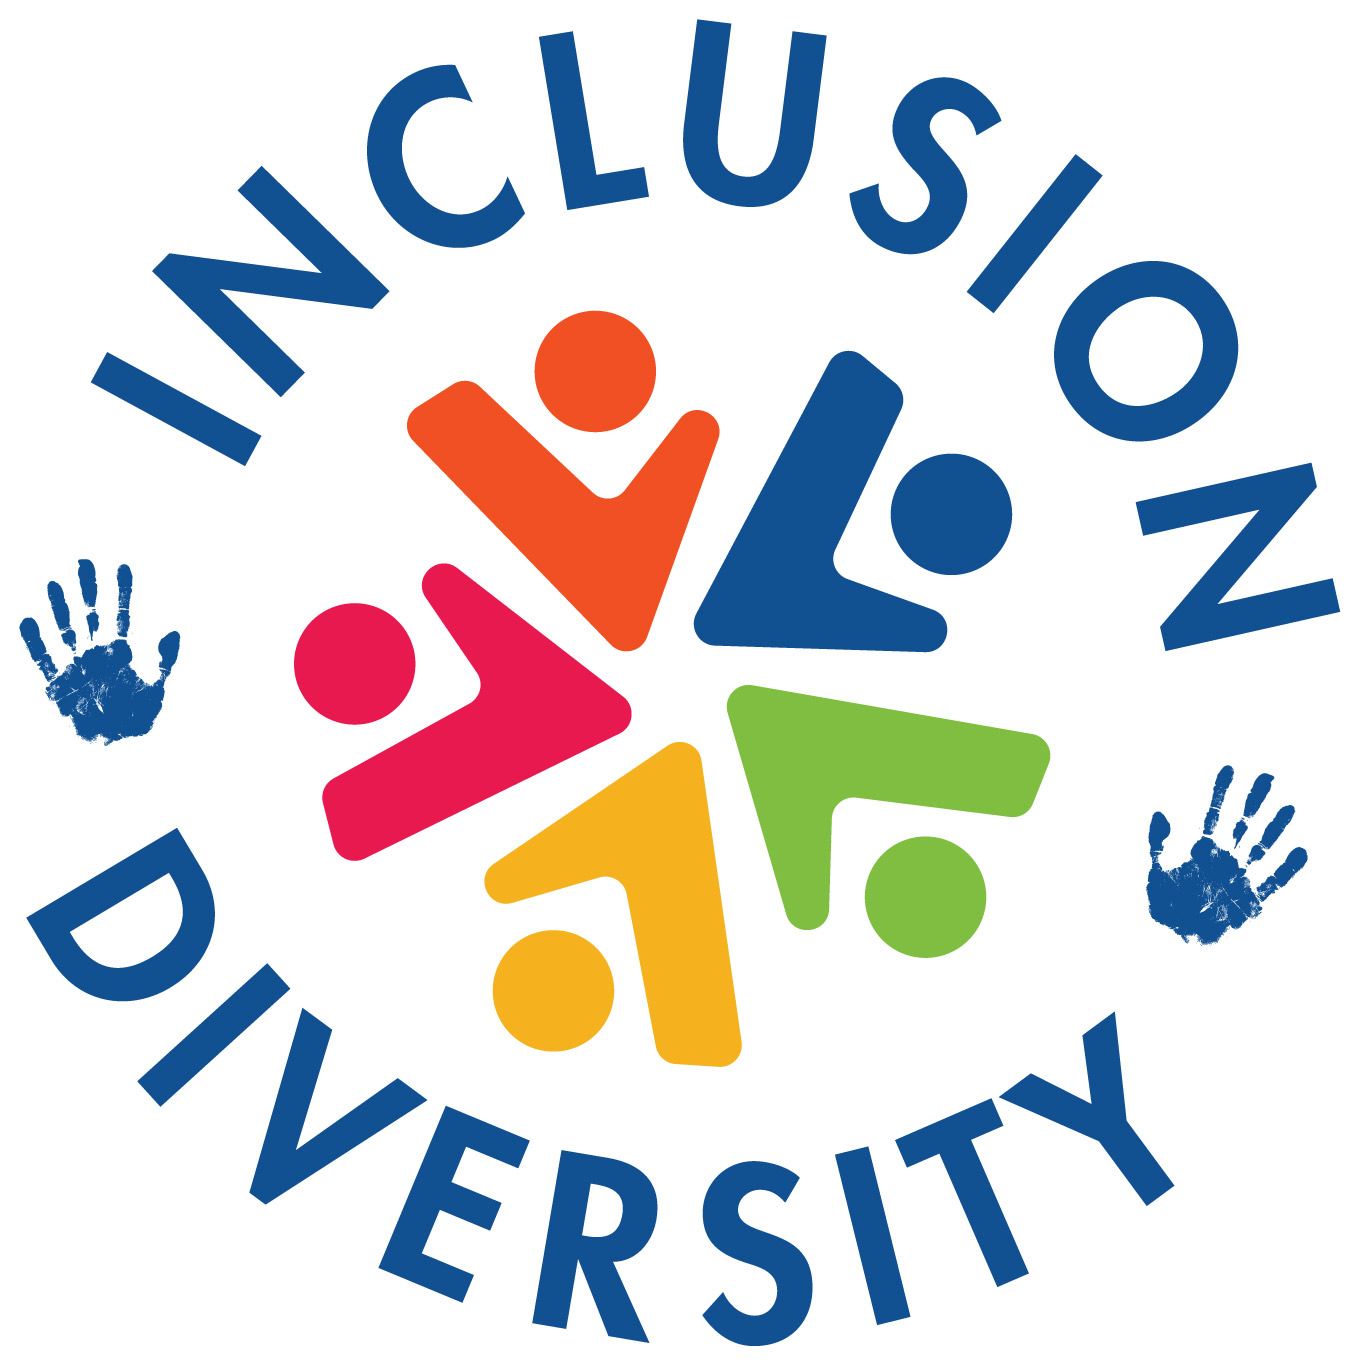 Online session on how to consider inclusion and diversity in EYF funded activities